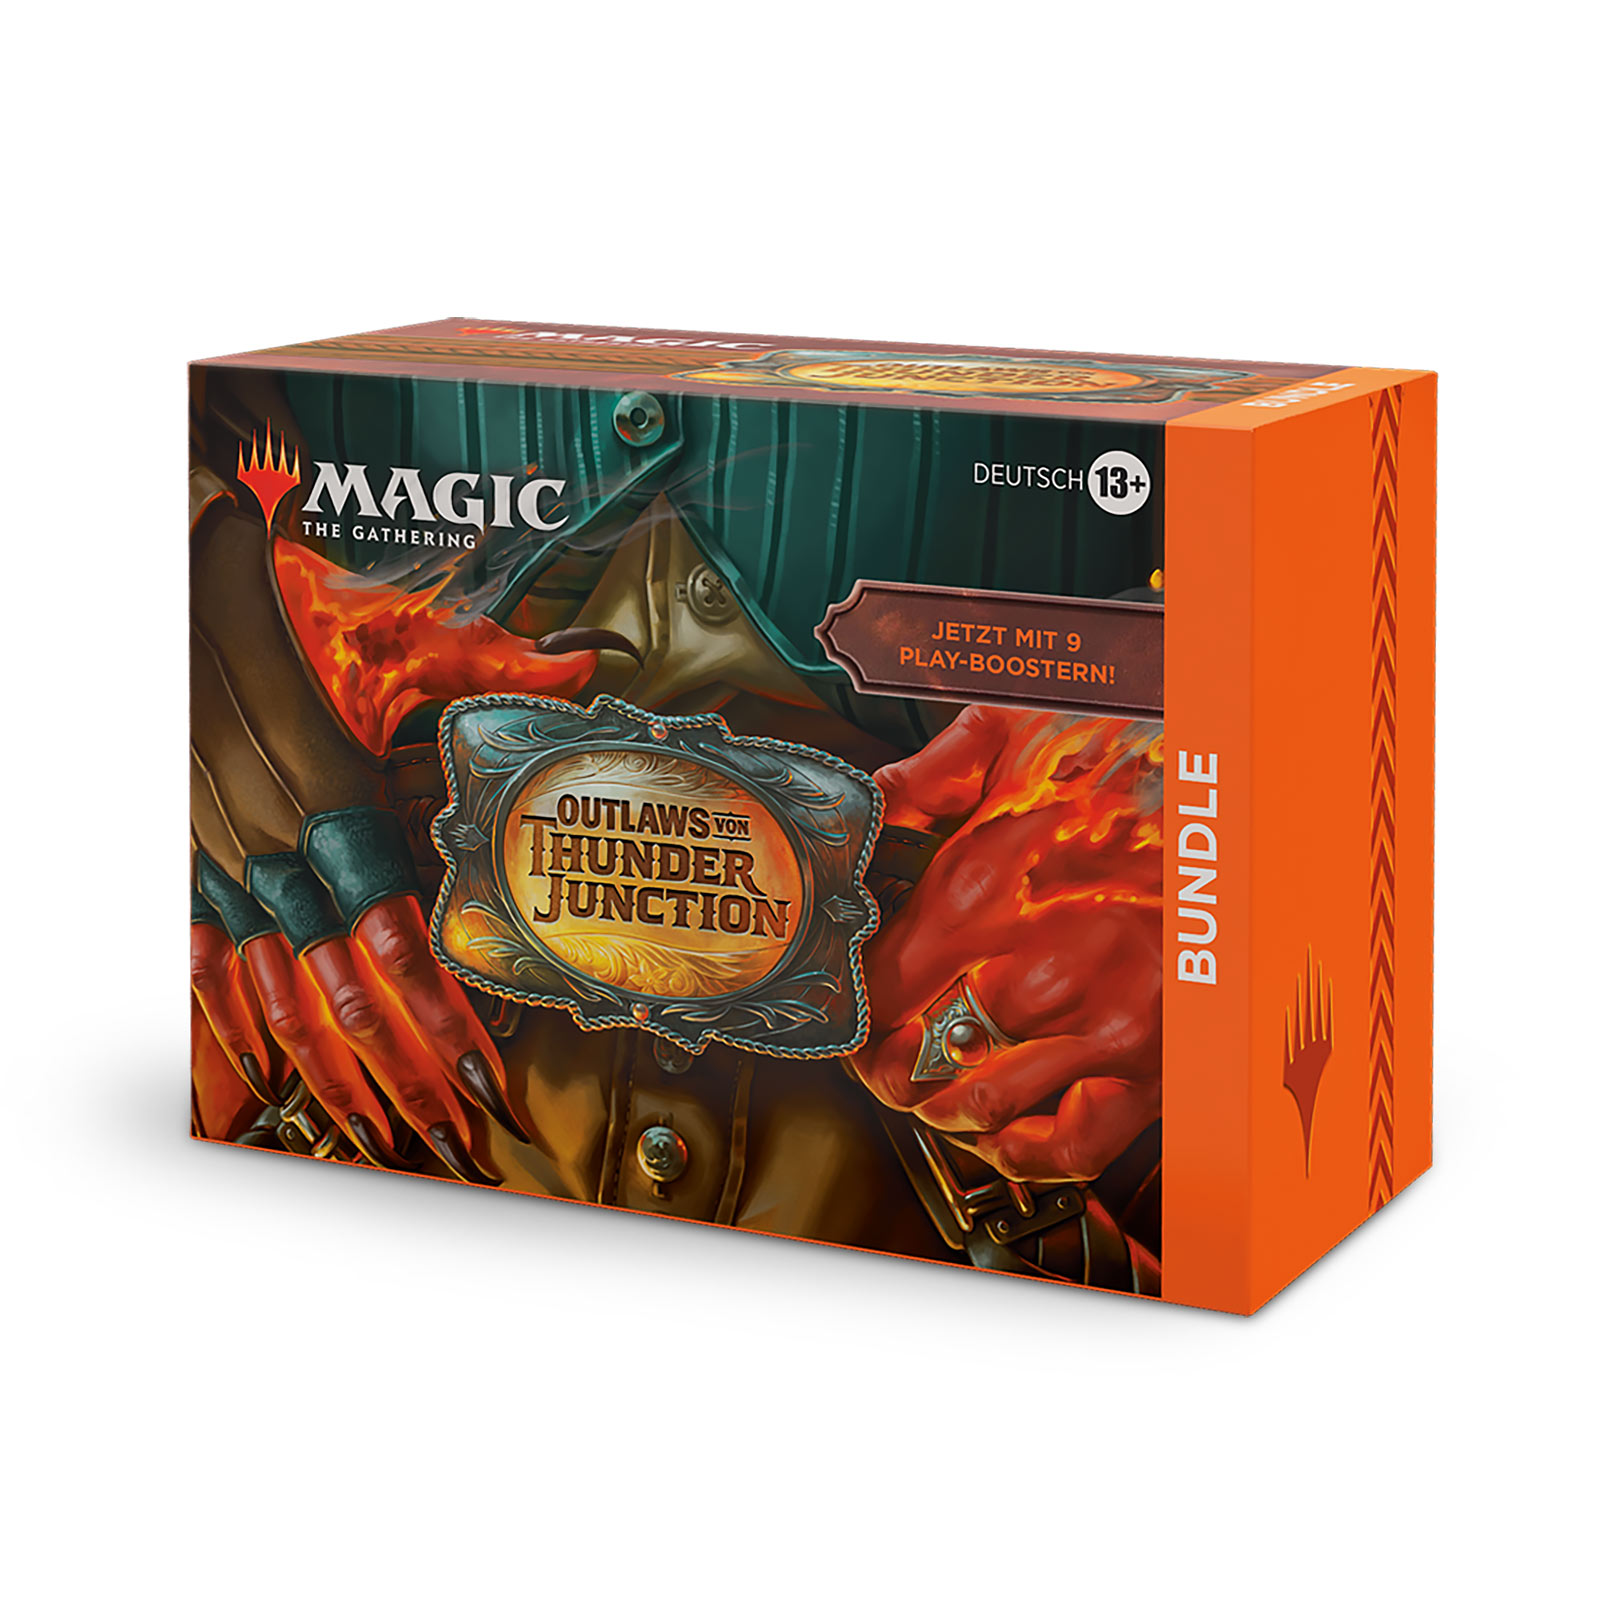 Outlaws von Thunder Junction Bundle - Magic The Gathering